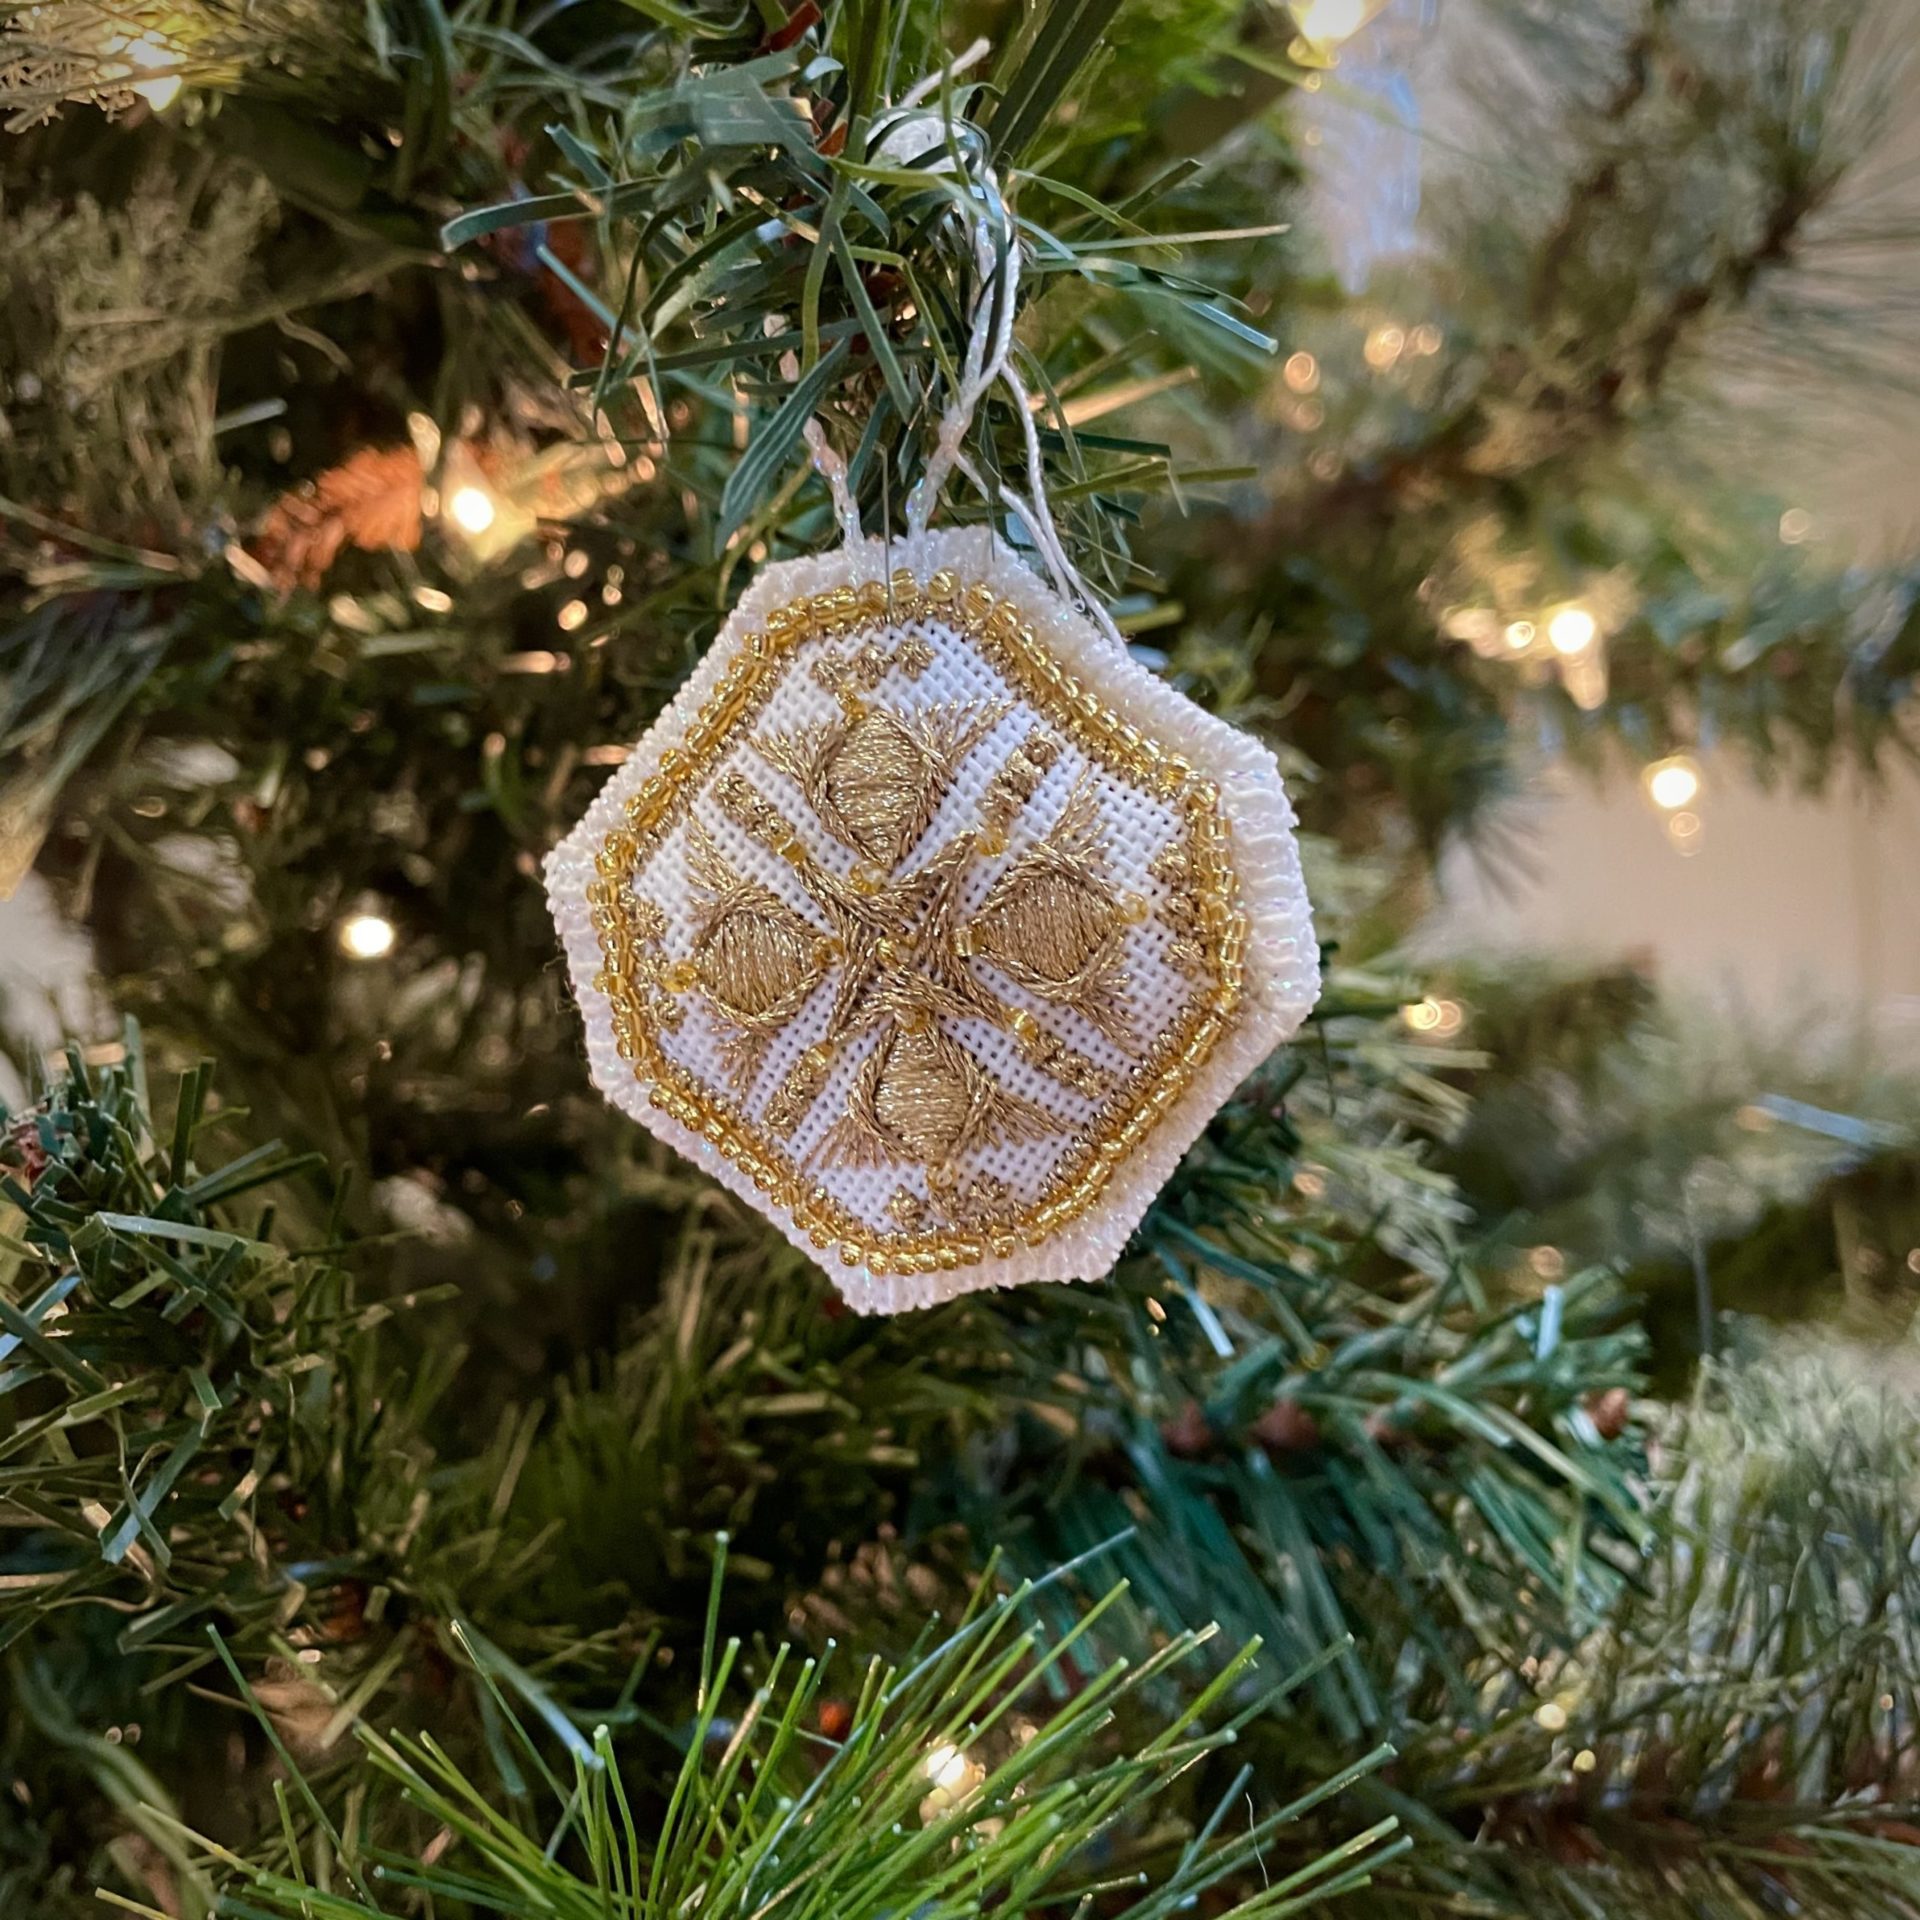 2020 Holiday Countdown: 31 Days of Stitched Ornaments